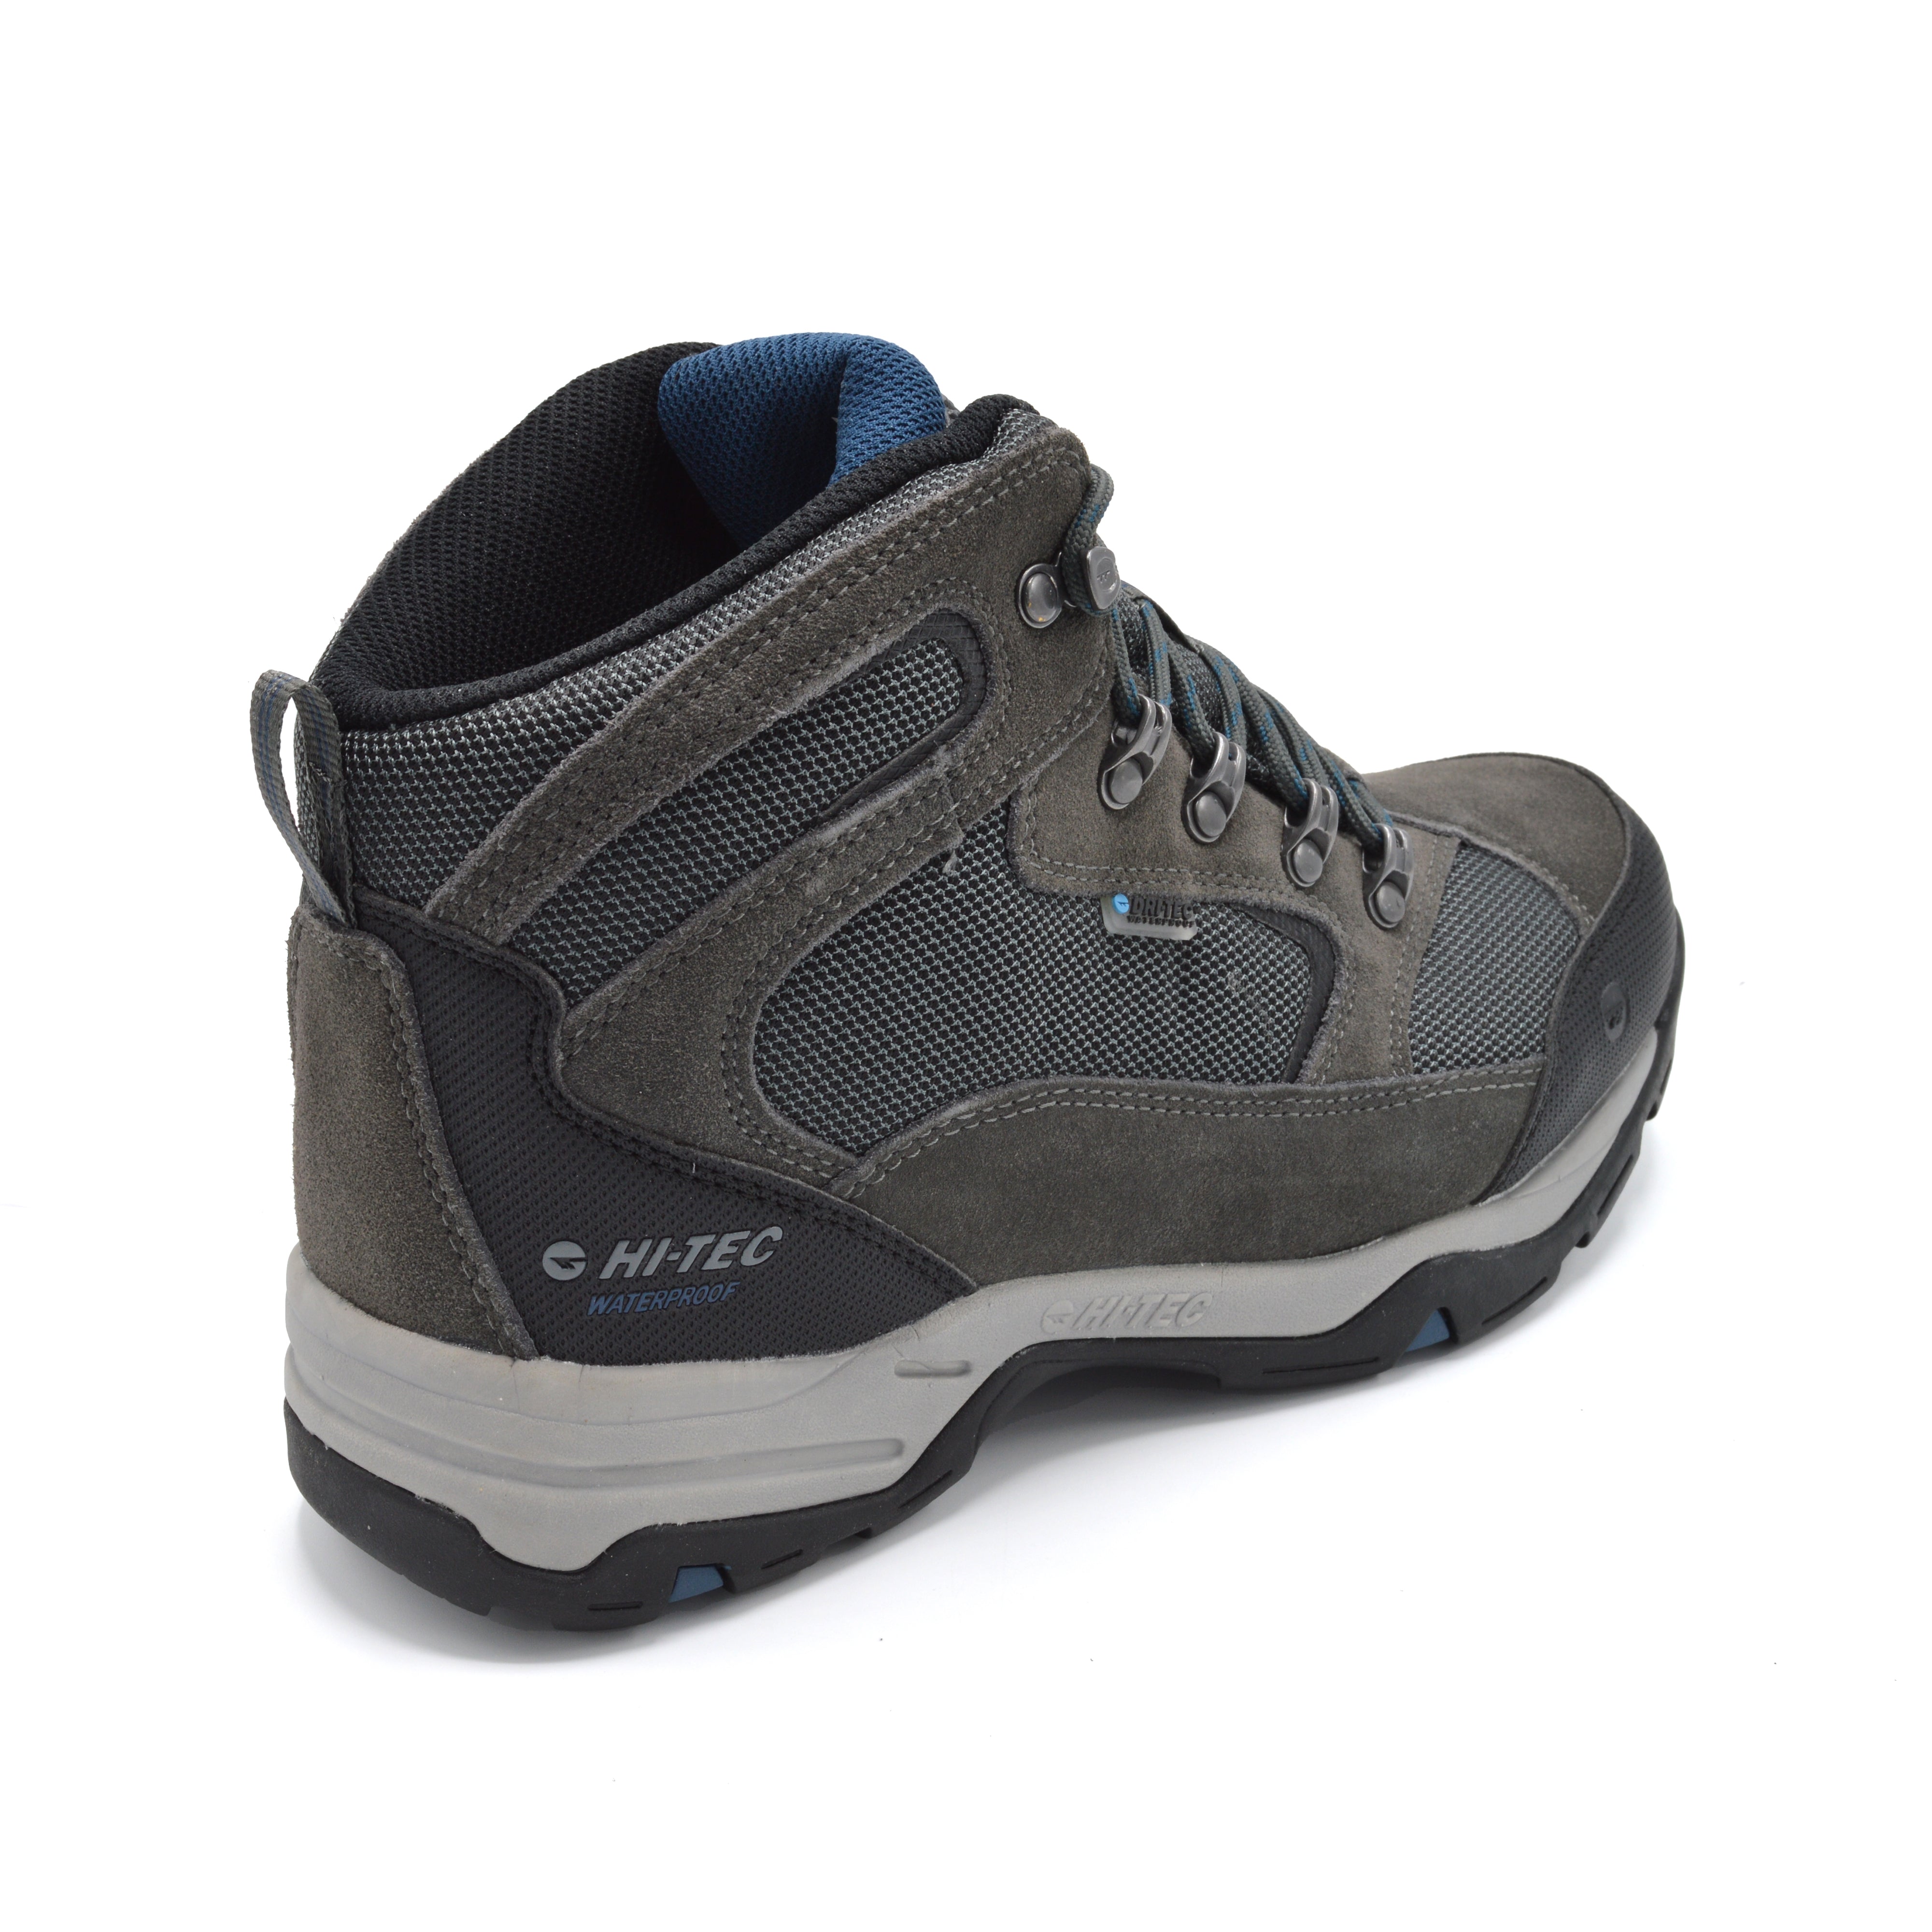 Hiker - Wide Fitting Walking and Trail Boot - 2V (2E-4E) Fitting - Grey